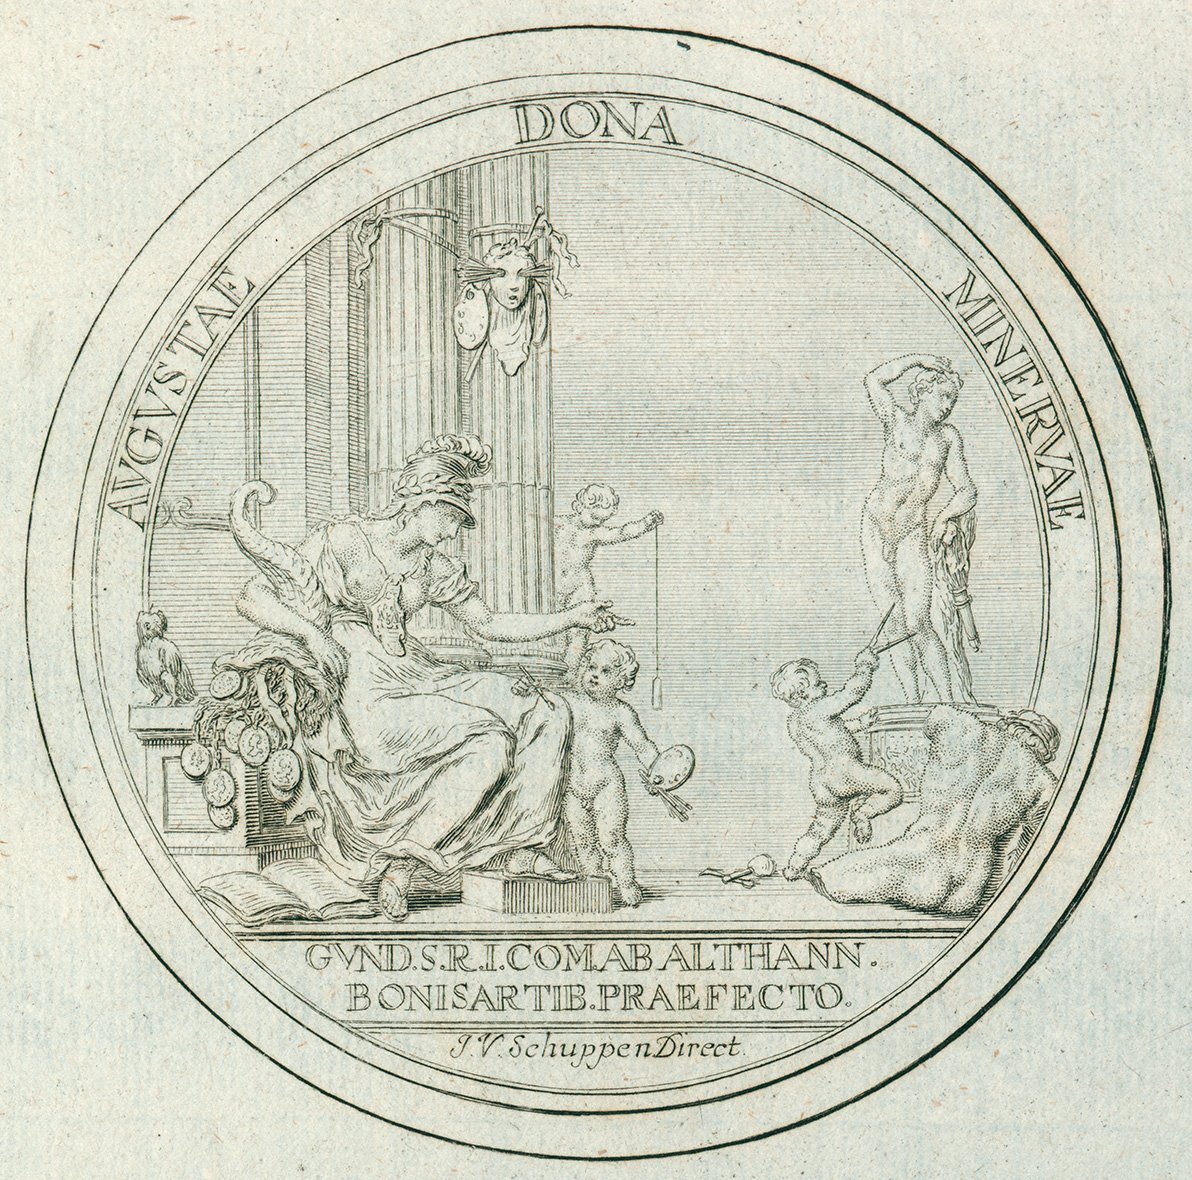 Fine ink drawing of a circular medal depicting the goddess Minerva and allegorical figures of the arts and inscription in Latin, black ink on white paper.